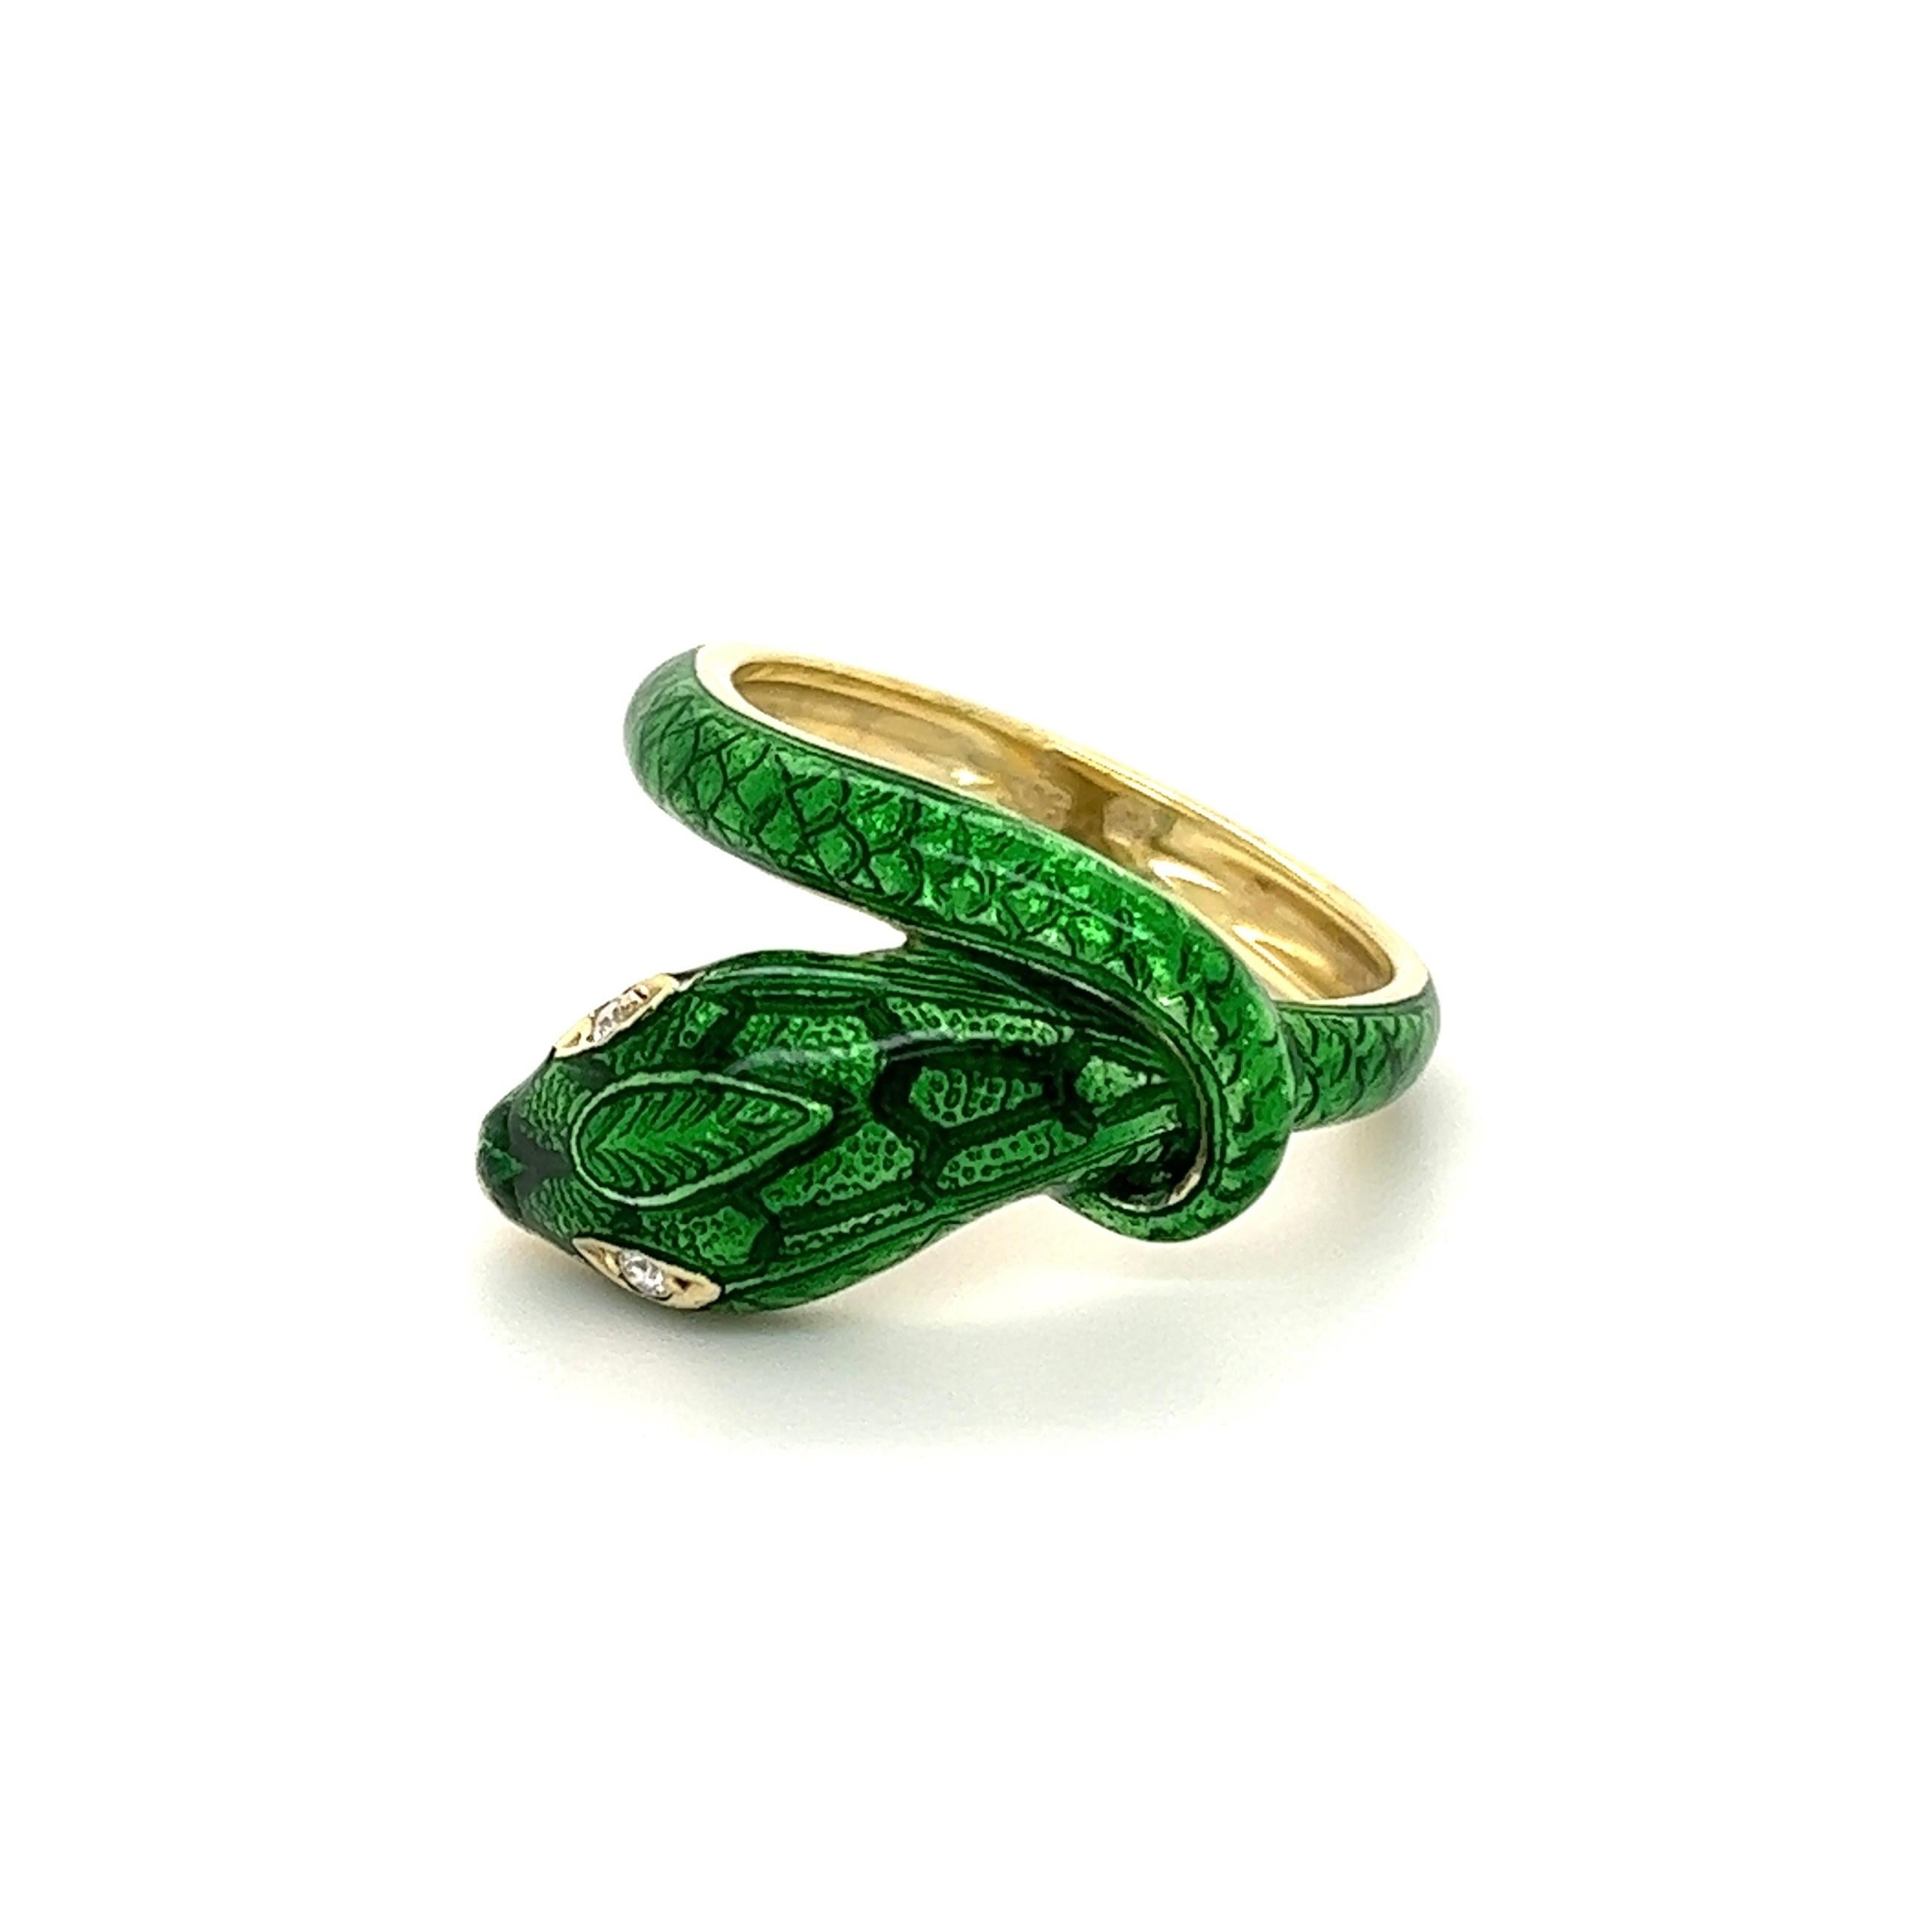 Striking Designer Victor Mayer Serpent Ring. Hand crafted in 14K Yellow Gold. This piece has a wonderful, old-world charm. Hand set Diamond Eyes, approx. 0.02tcw. A wonderful decadent example of the Egyptian Revival style! Size 7.5+. Super Cool